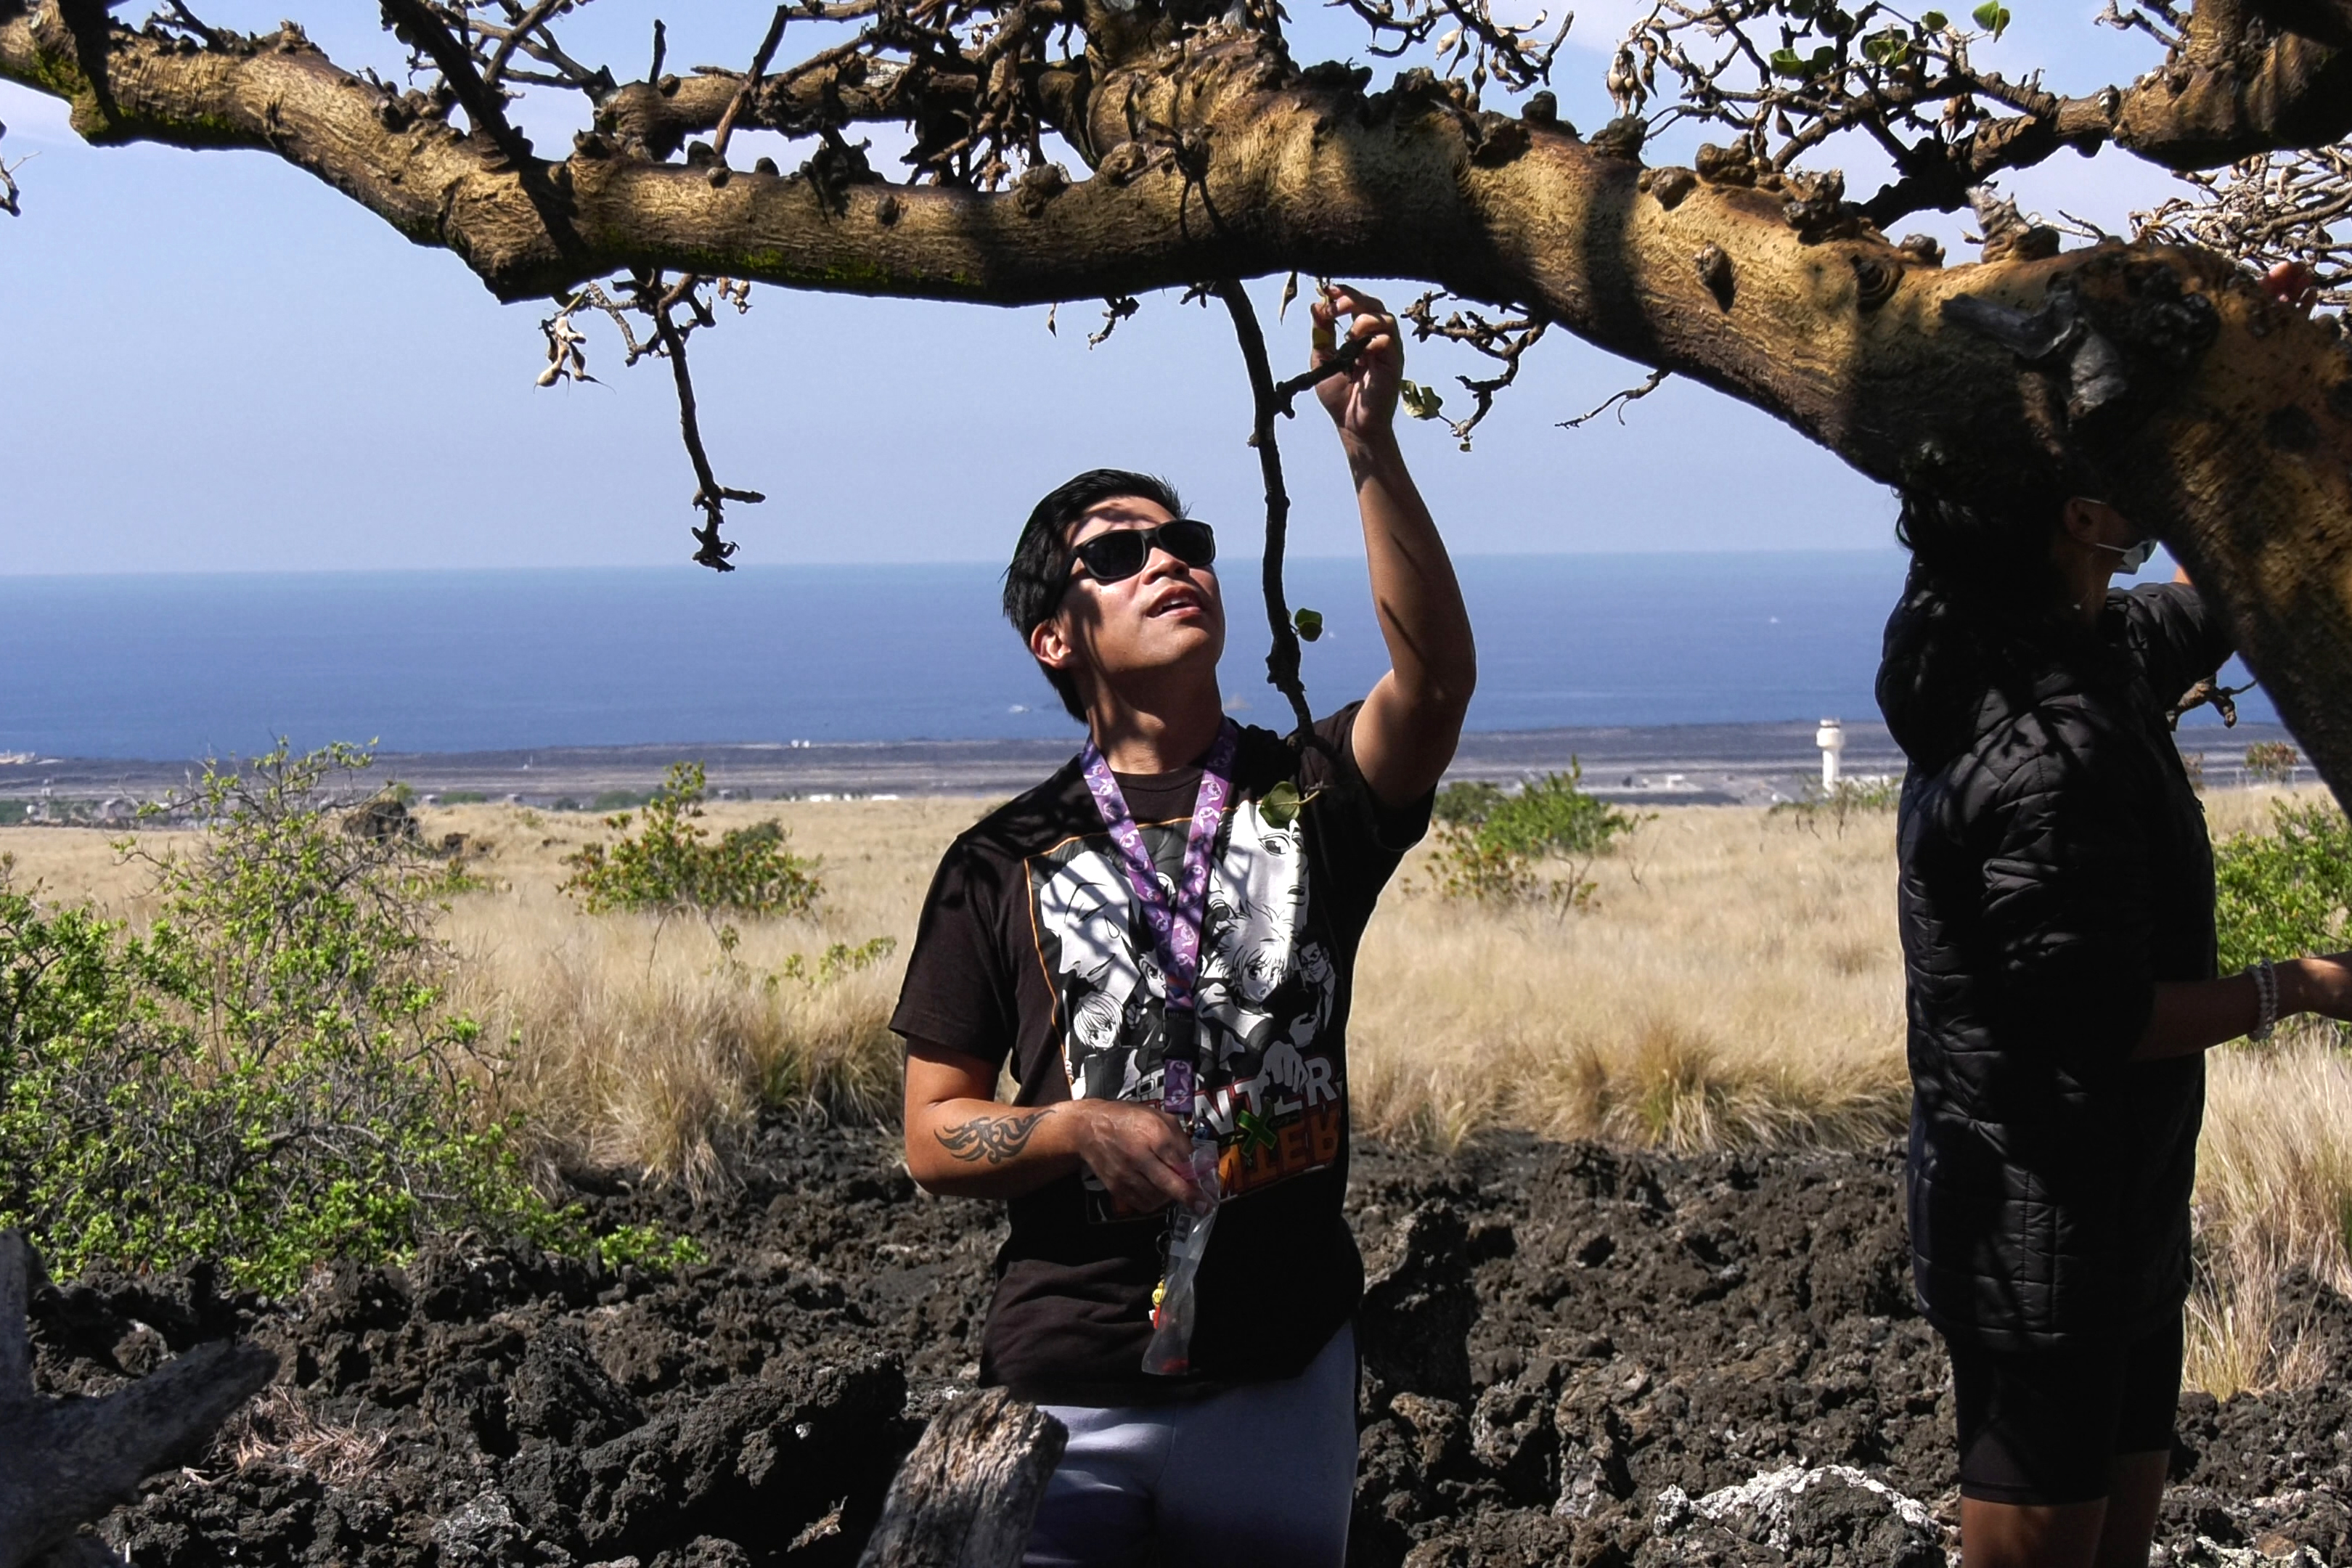 Hawai'i Community College – Pālamanui student Vinny Cervantes-Bautista gathers seeds from a wiliwili tree during a class excursion to the Pālamanui Campus Preserve during a class excursion November 9.  